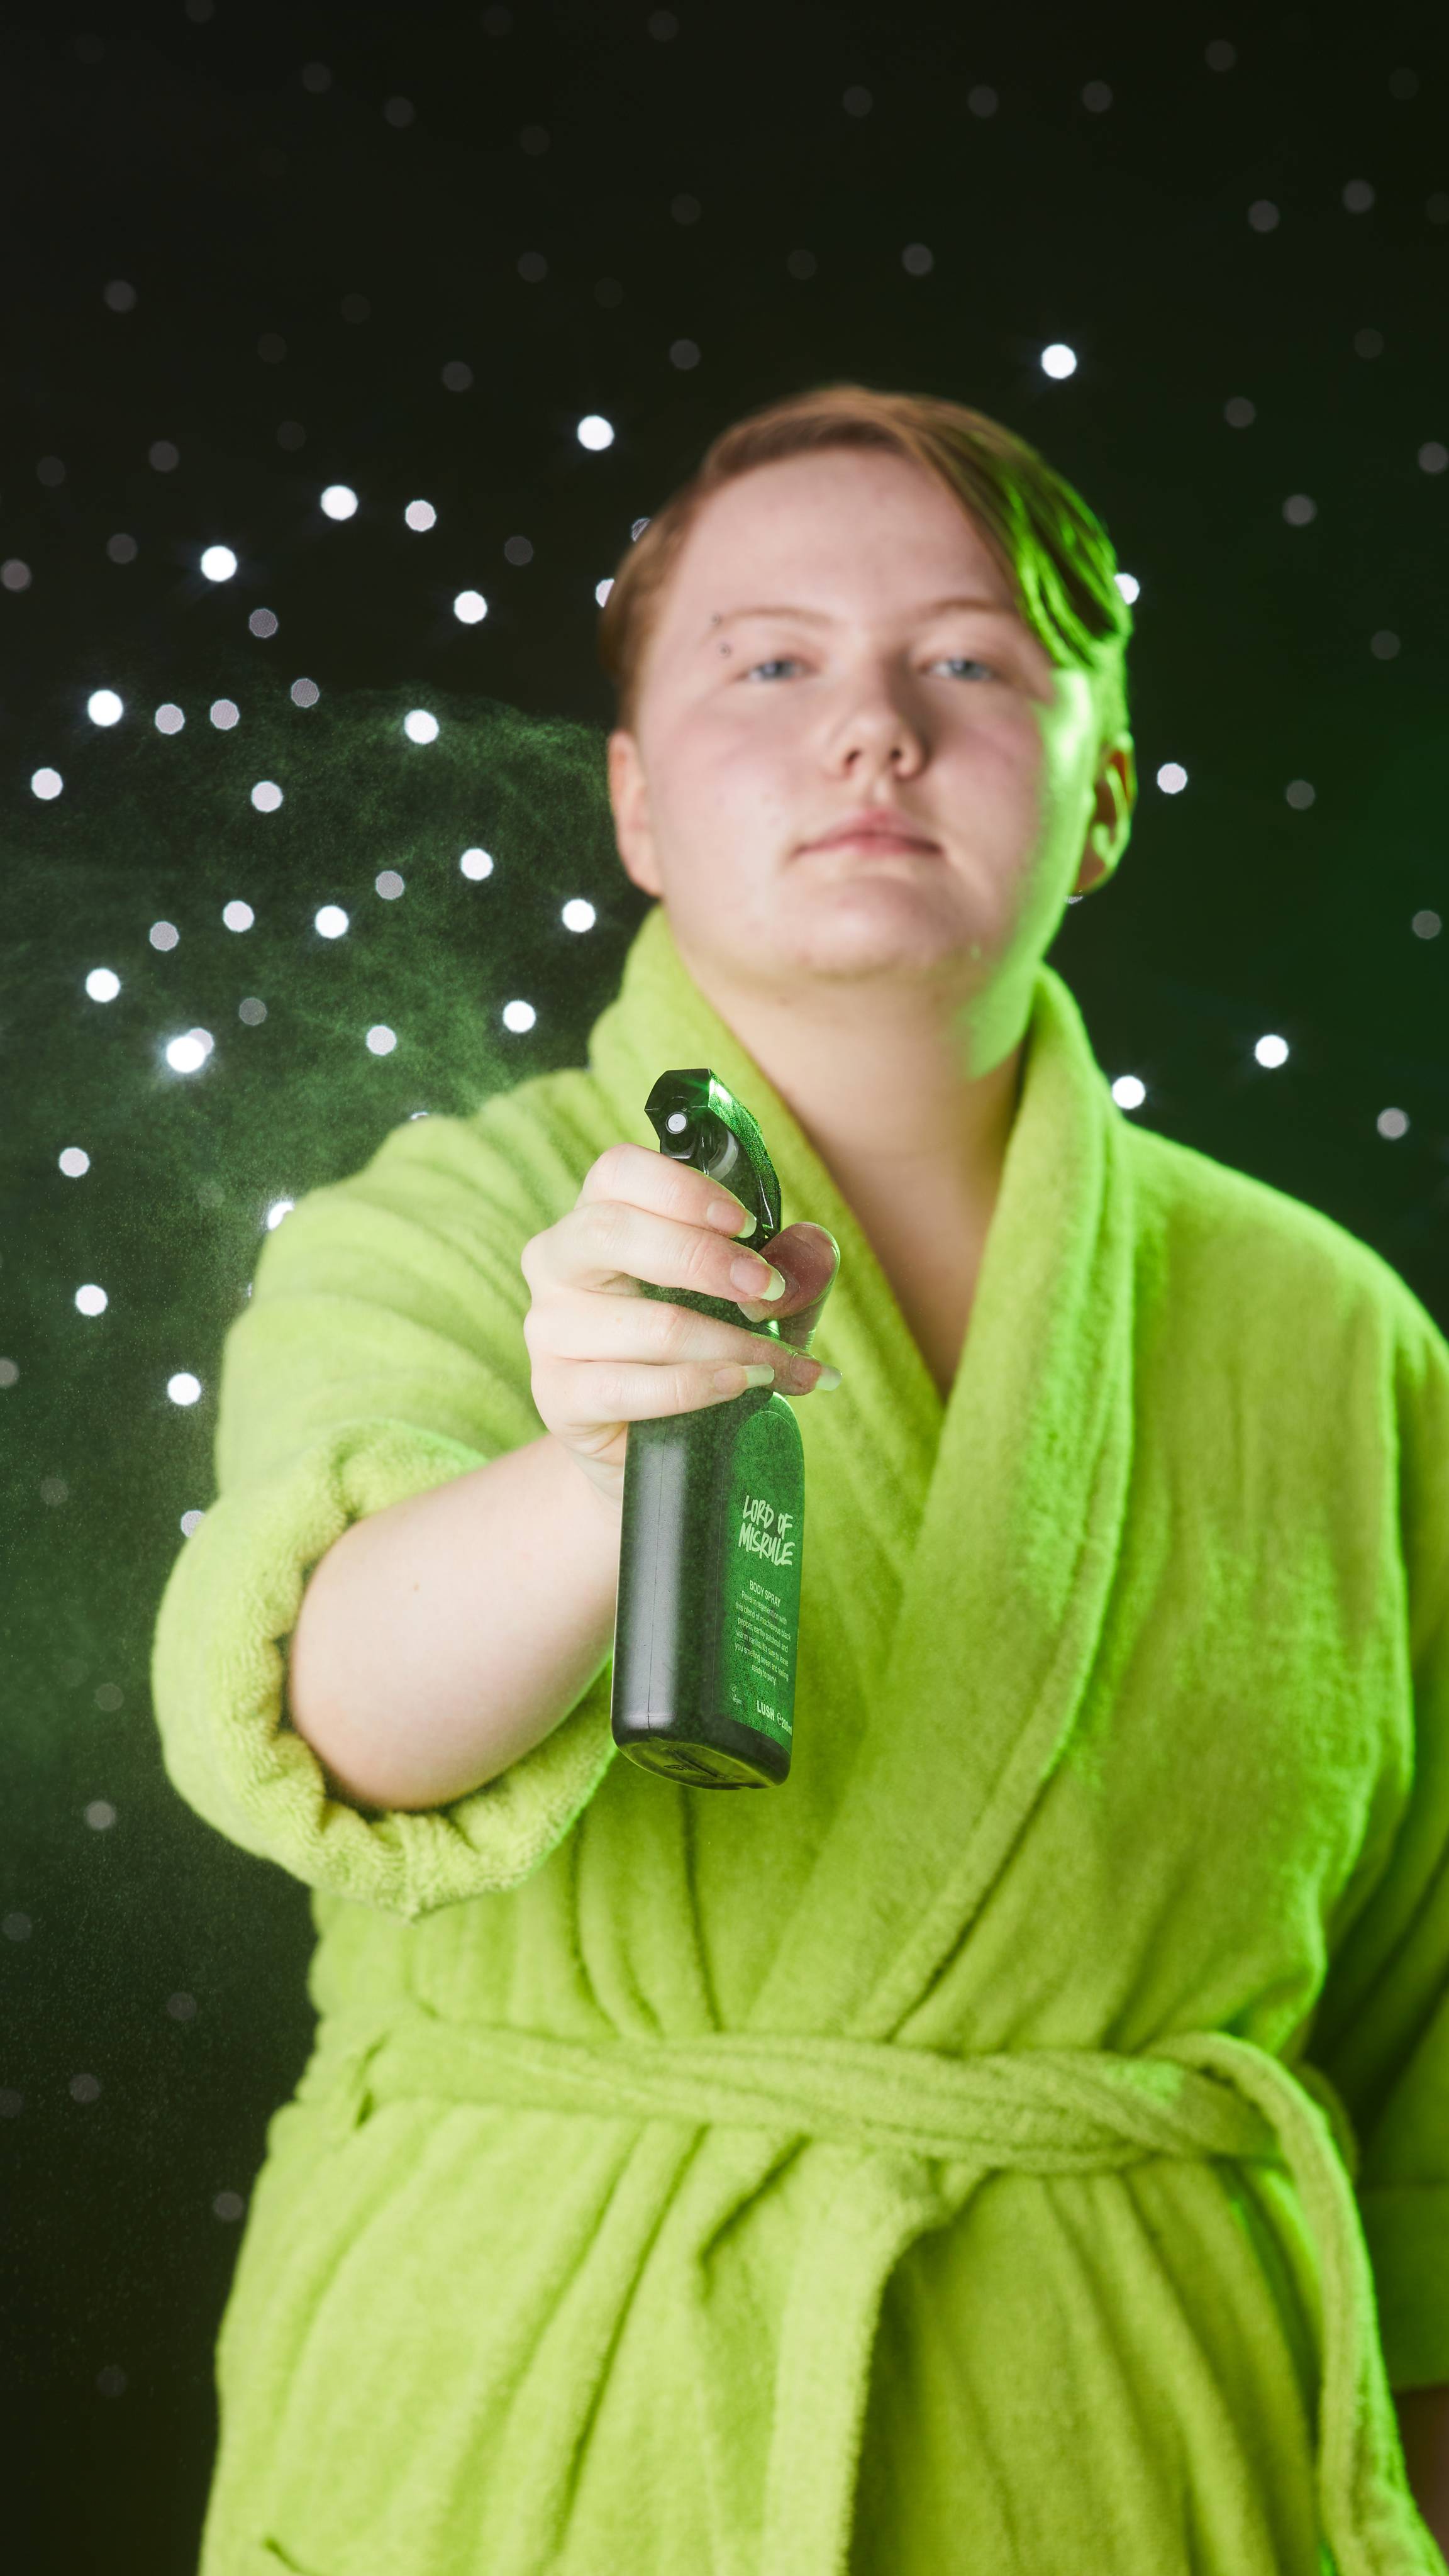 Model is stood on a black, twinkling background in a neon green robe spraying the bottle towards the camera.